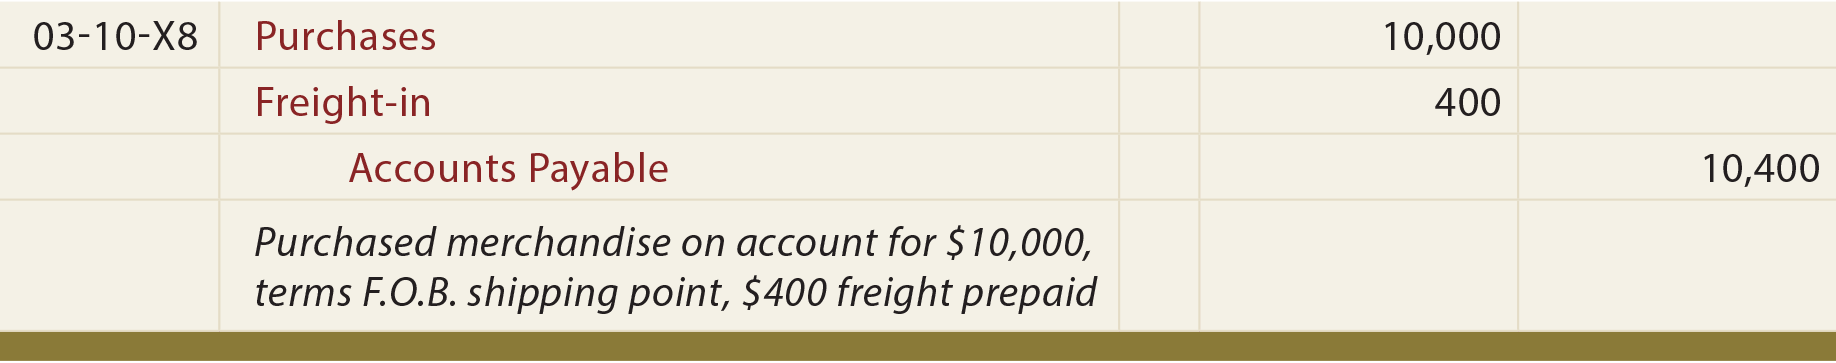 F.O.B. Shipping Point, Freight Prepaid Seller's General Journal Entry